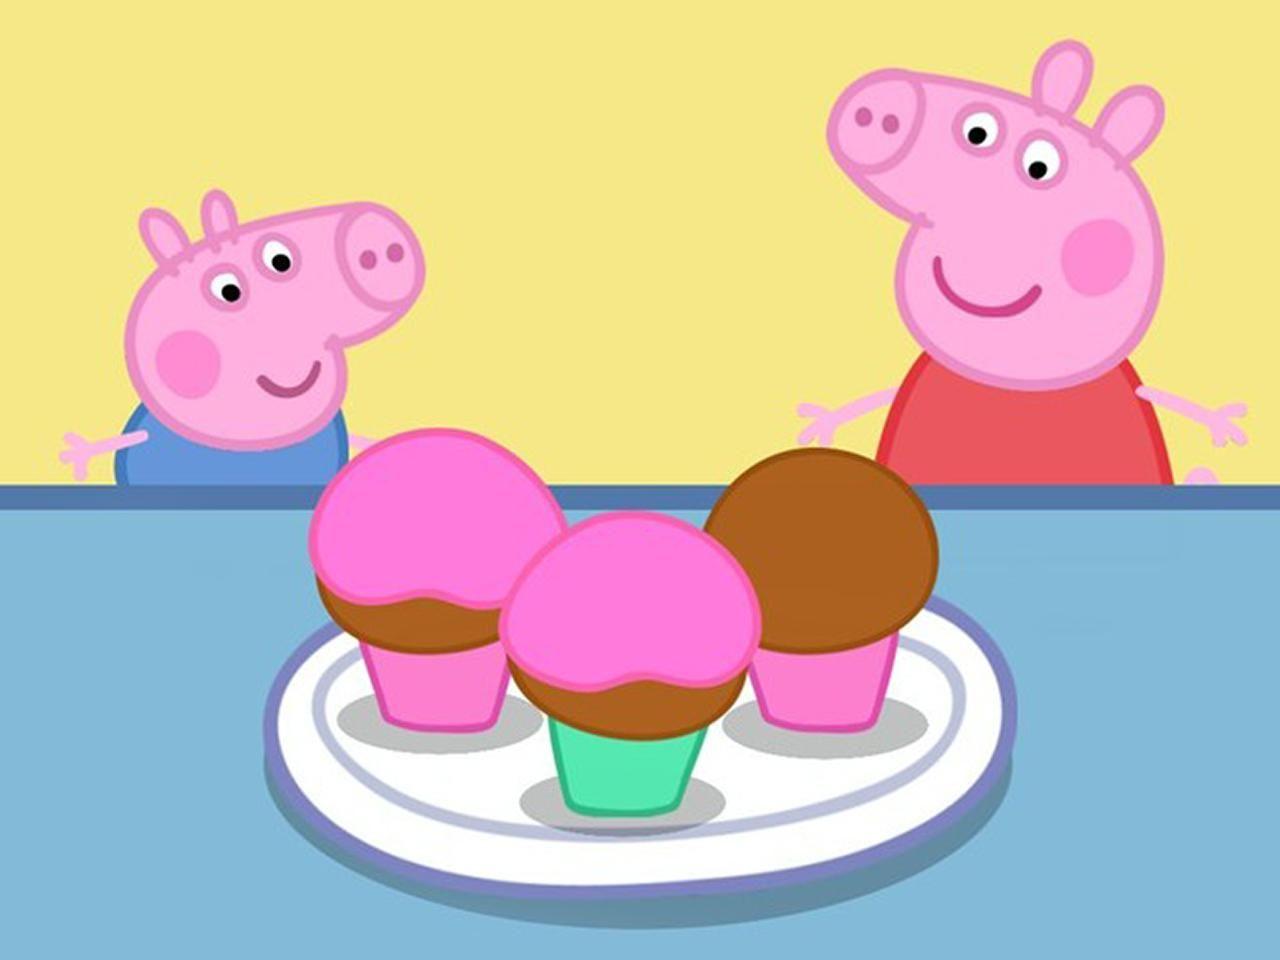 Download Peppa Pig Wallpaper HD for android, Peppa Pig Wallpaper